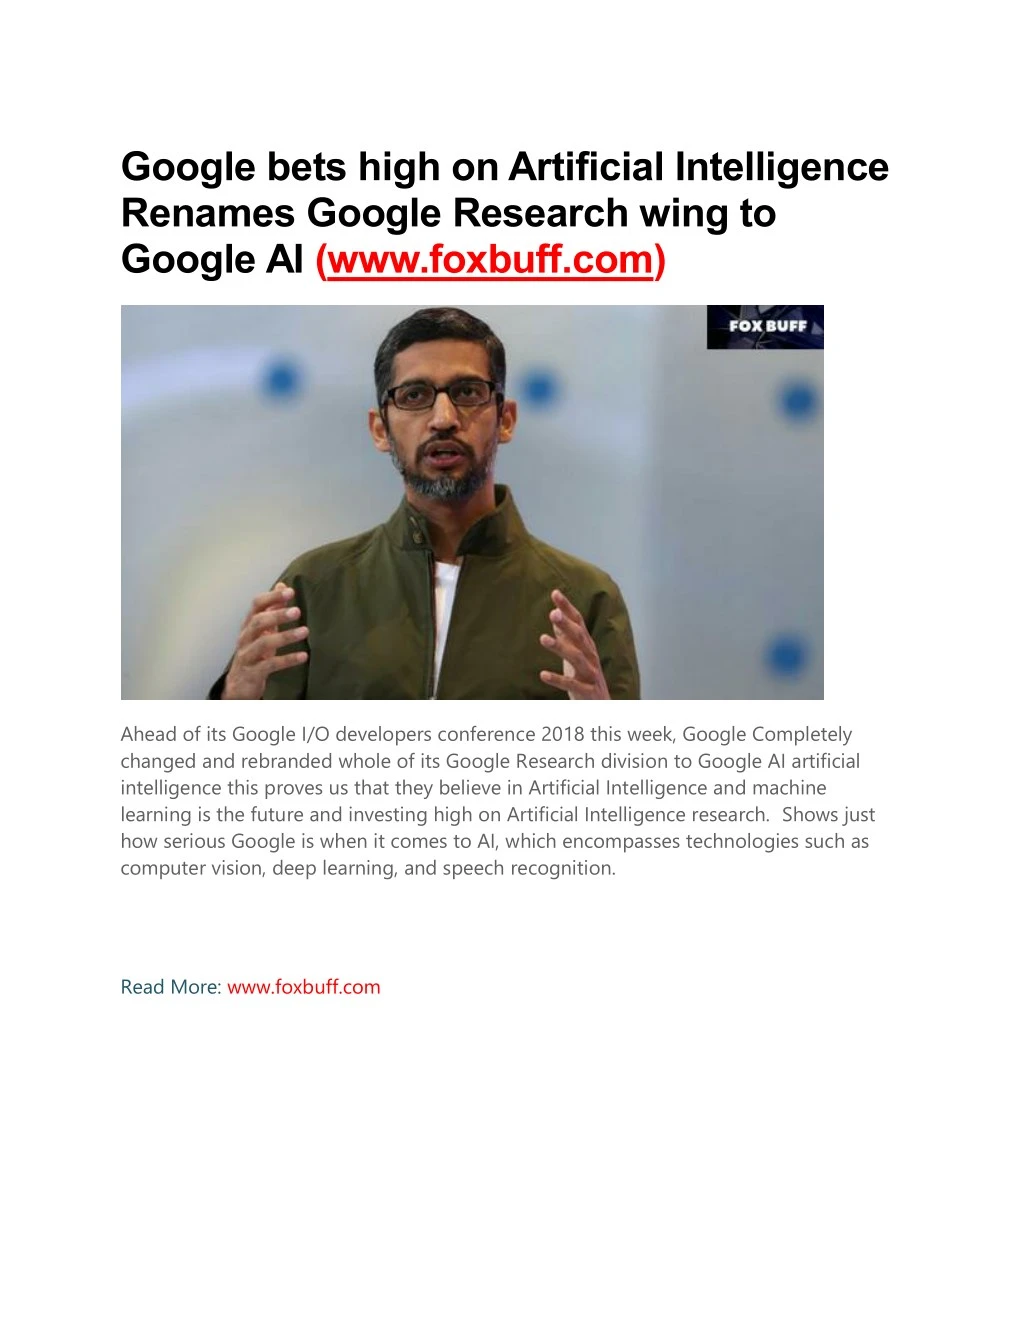 google bets high on artificial intelligence